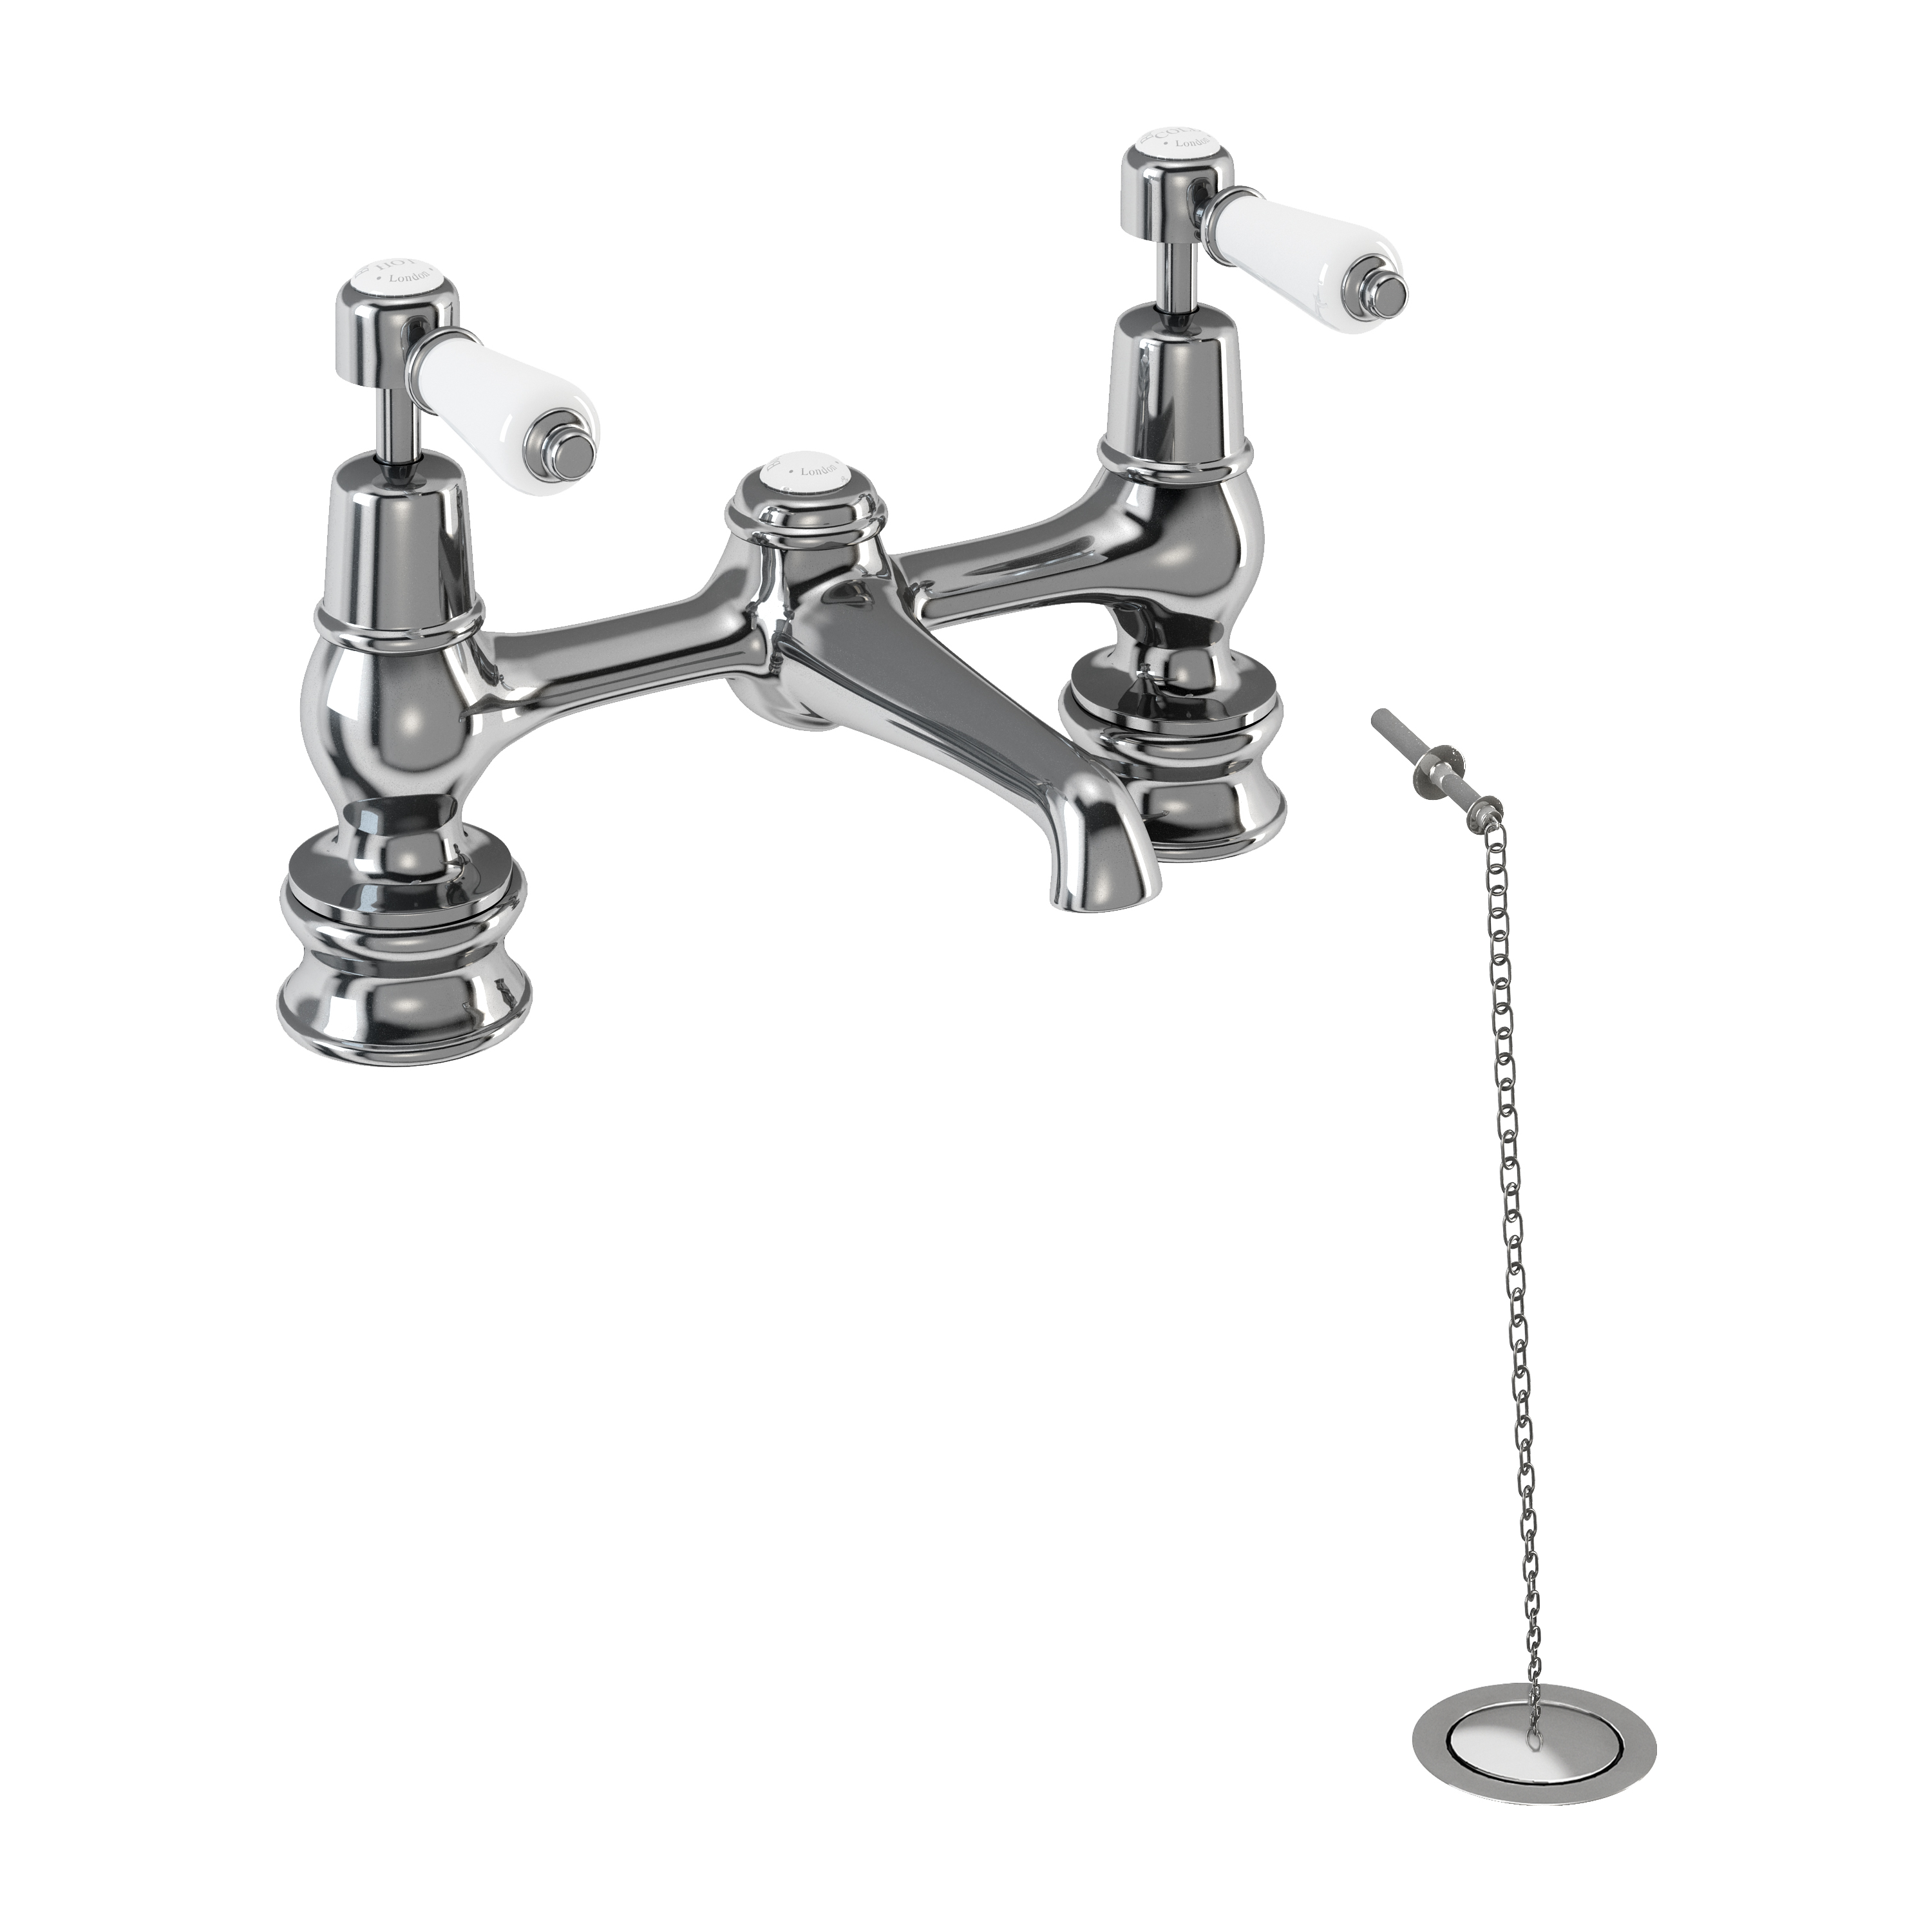 Kensington Regent 2 tap hole bridge basin mixer with low central indice with plug and chain waste with swivel spout